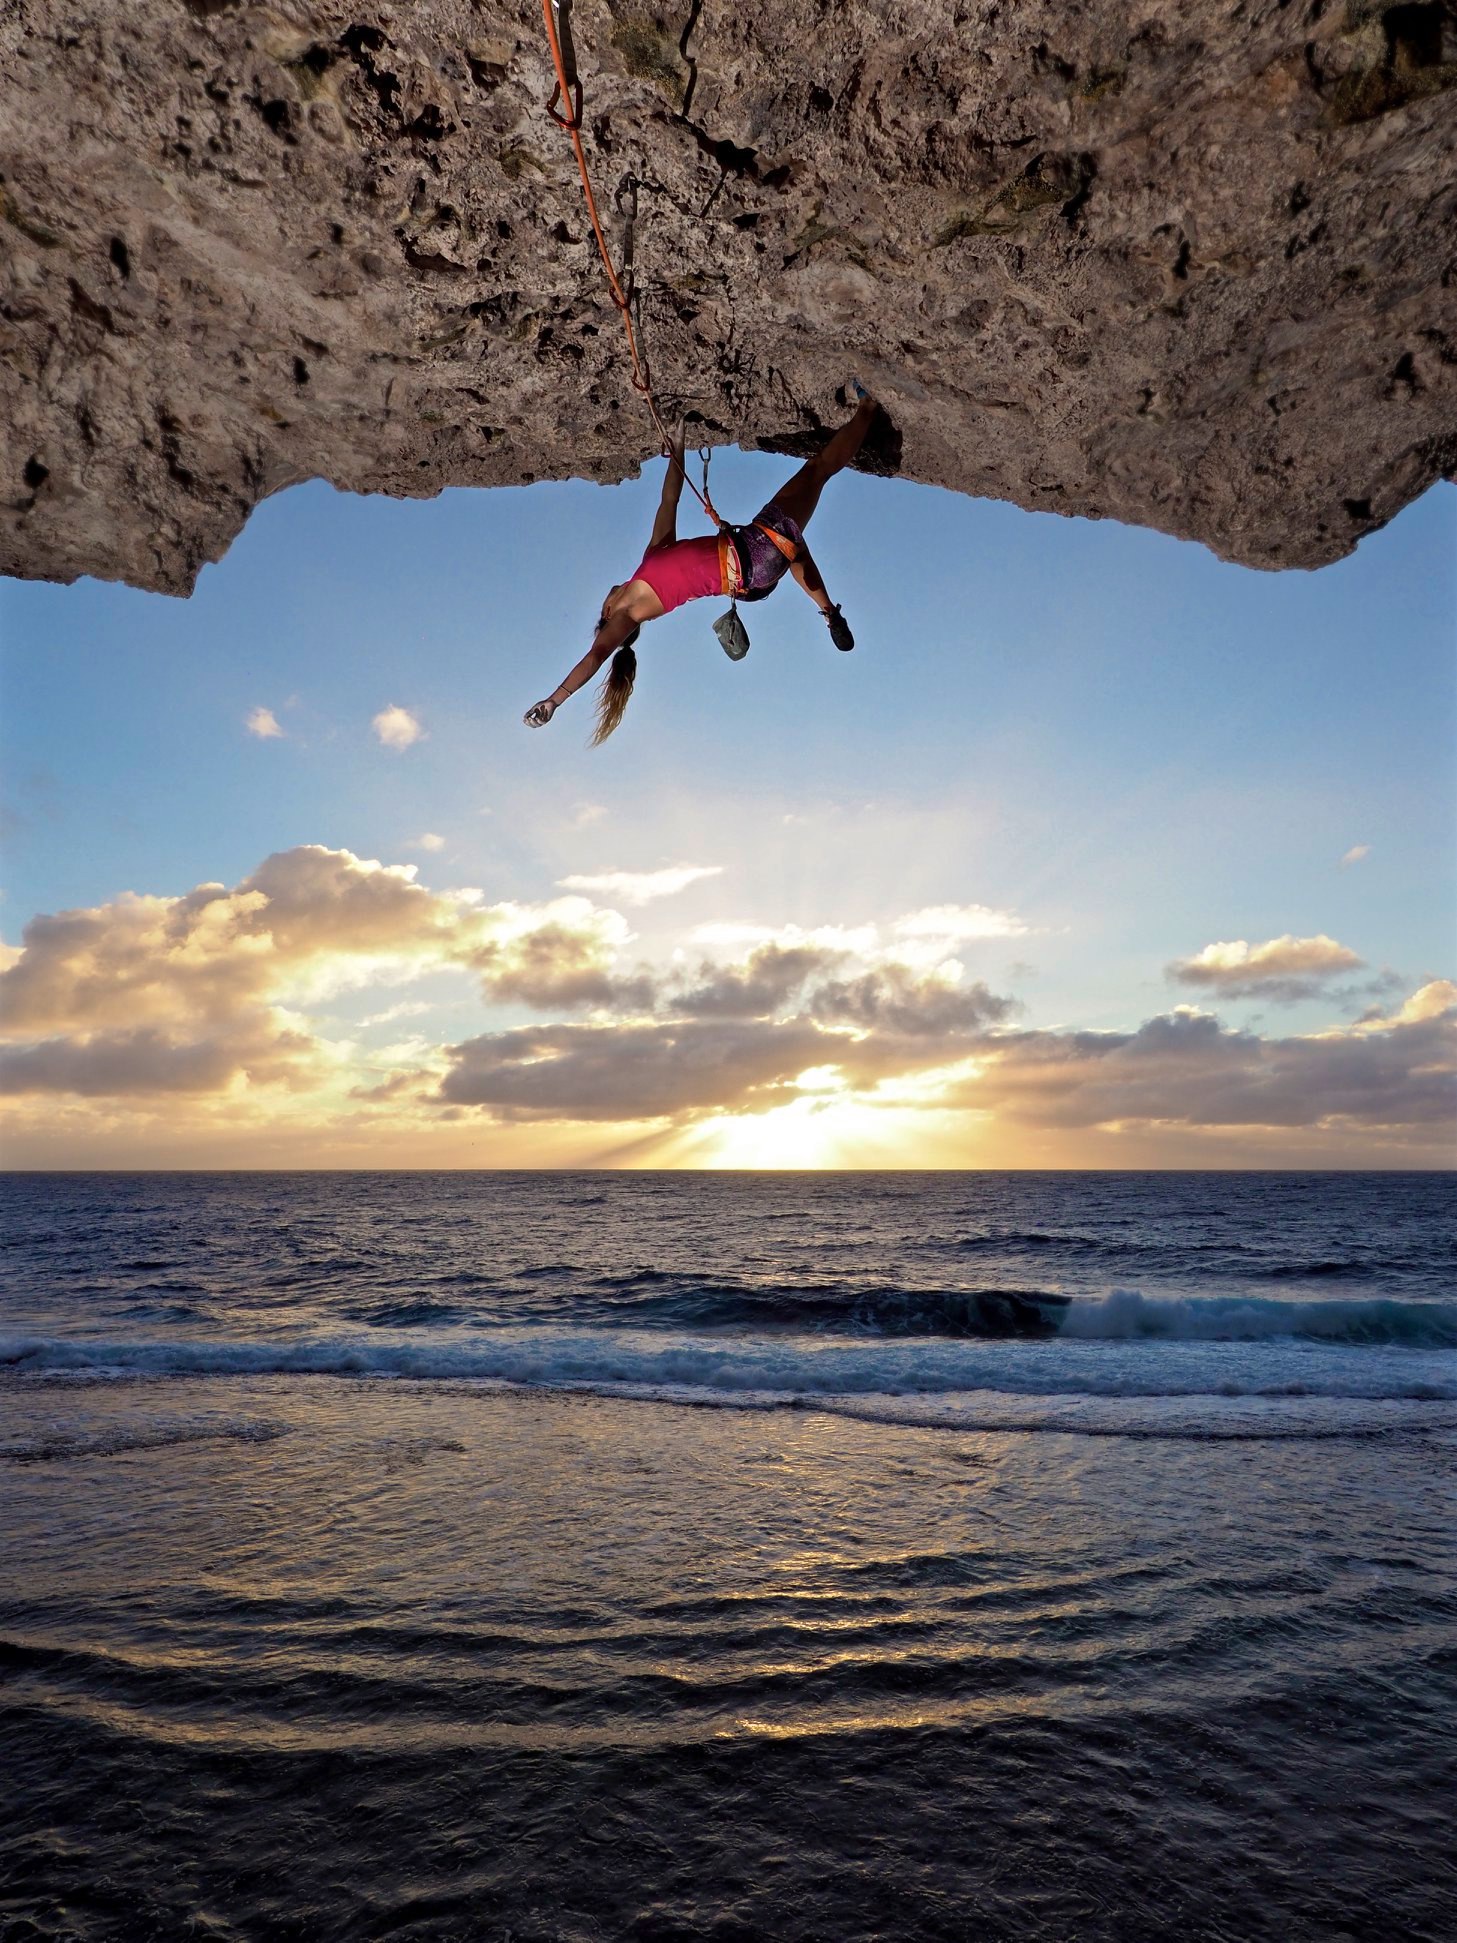 A sport climber rock climbing on the beach at sunset in Makateat